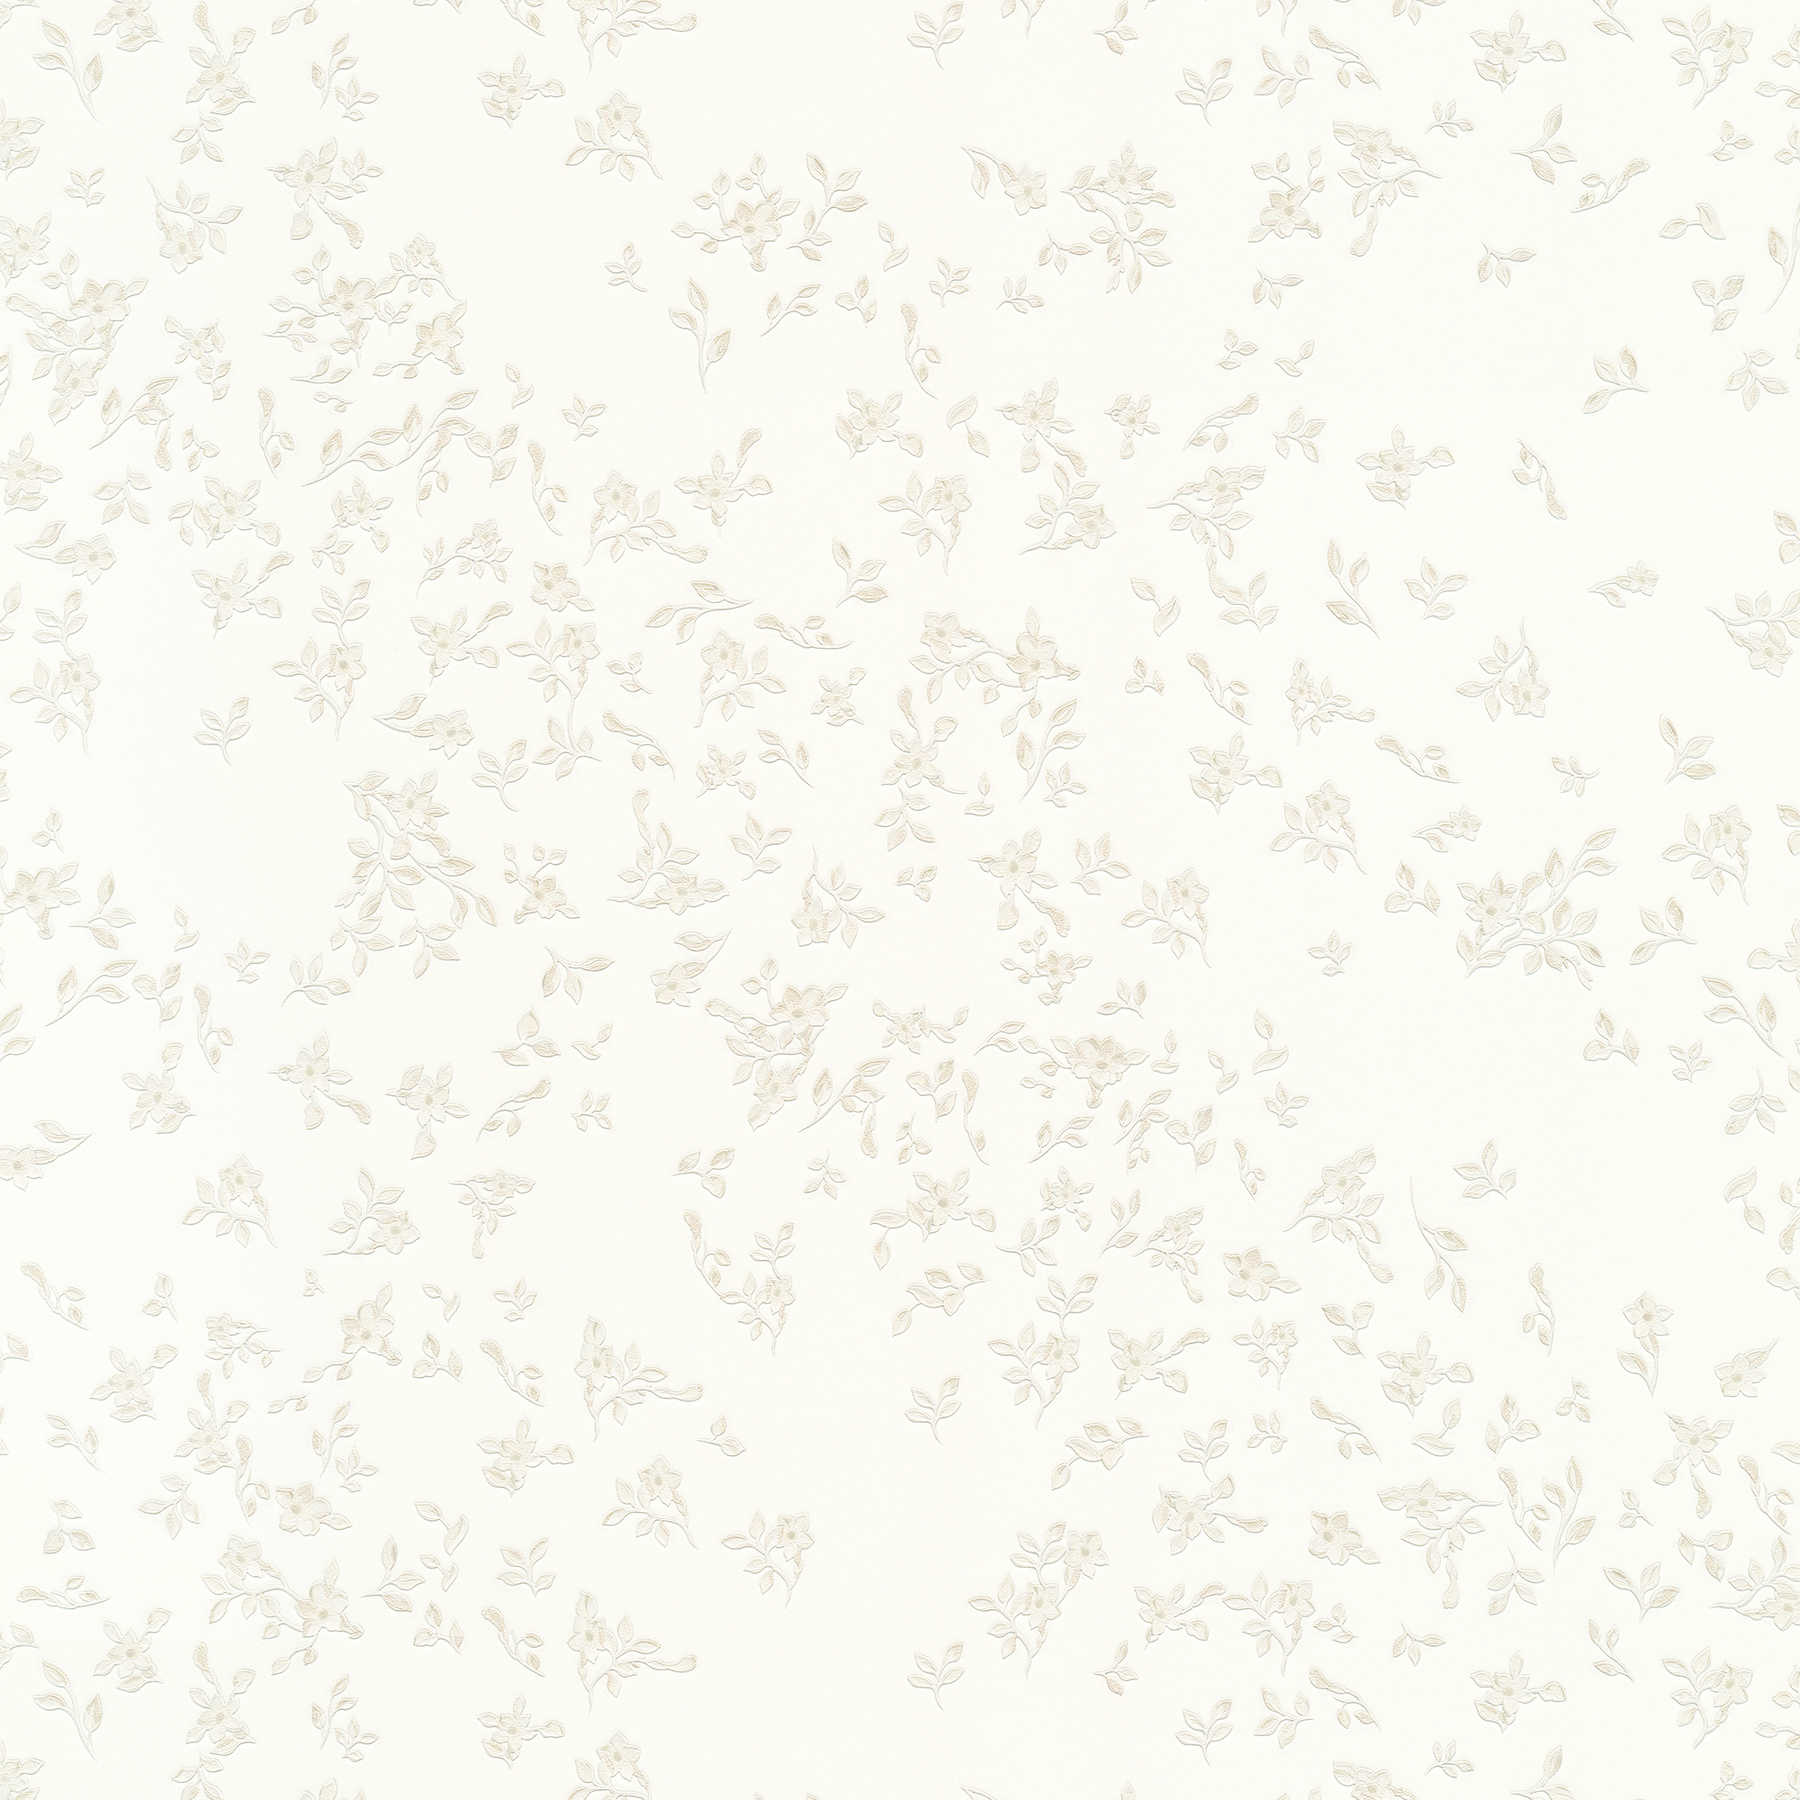 Bright VERSACE wallpaper with small flowers - cream
